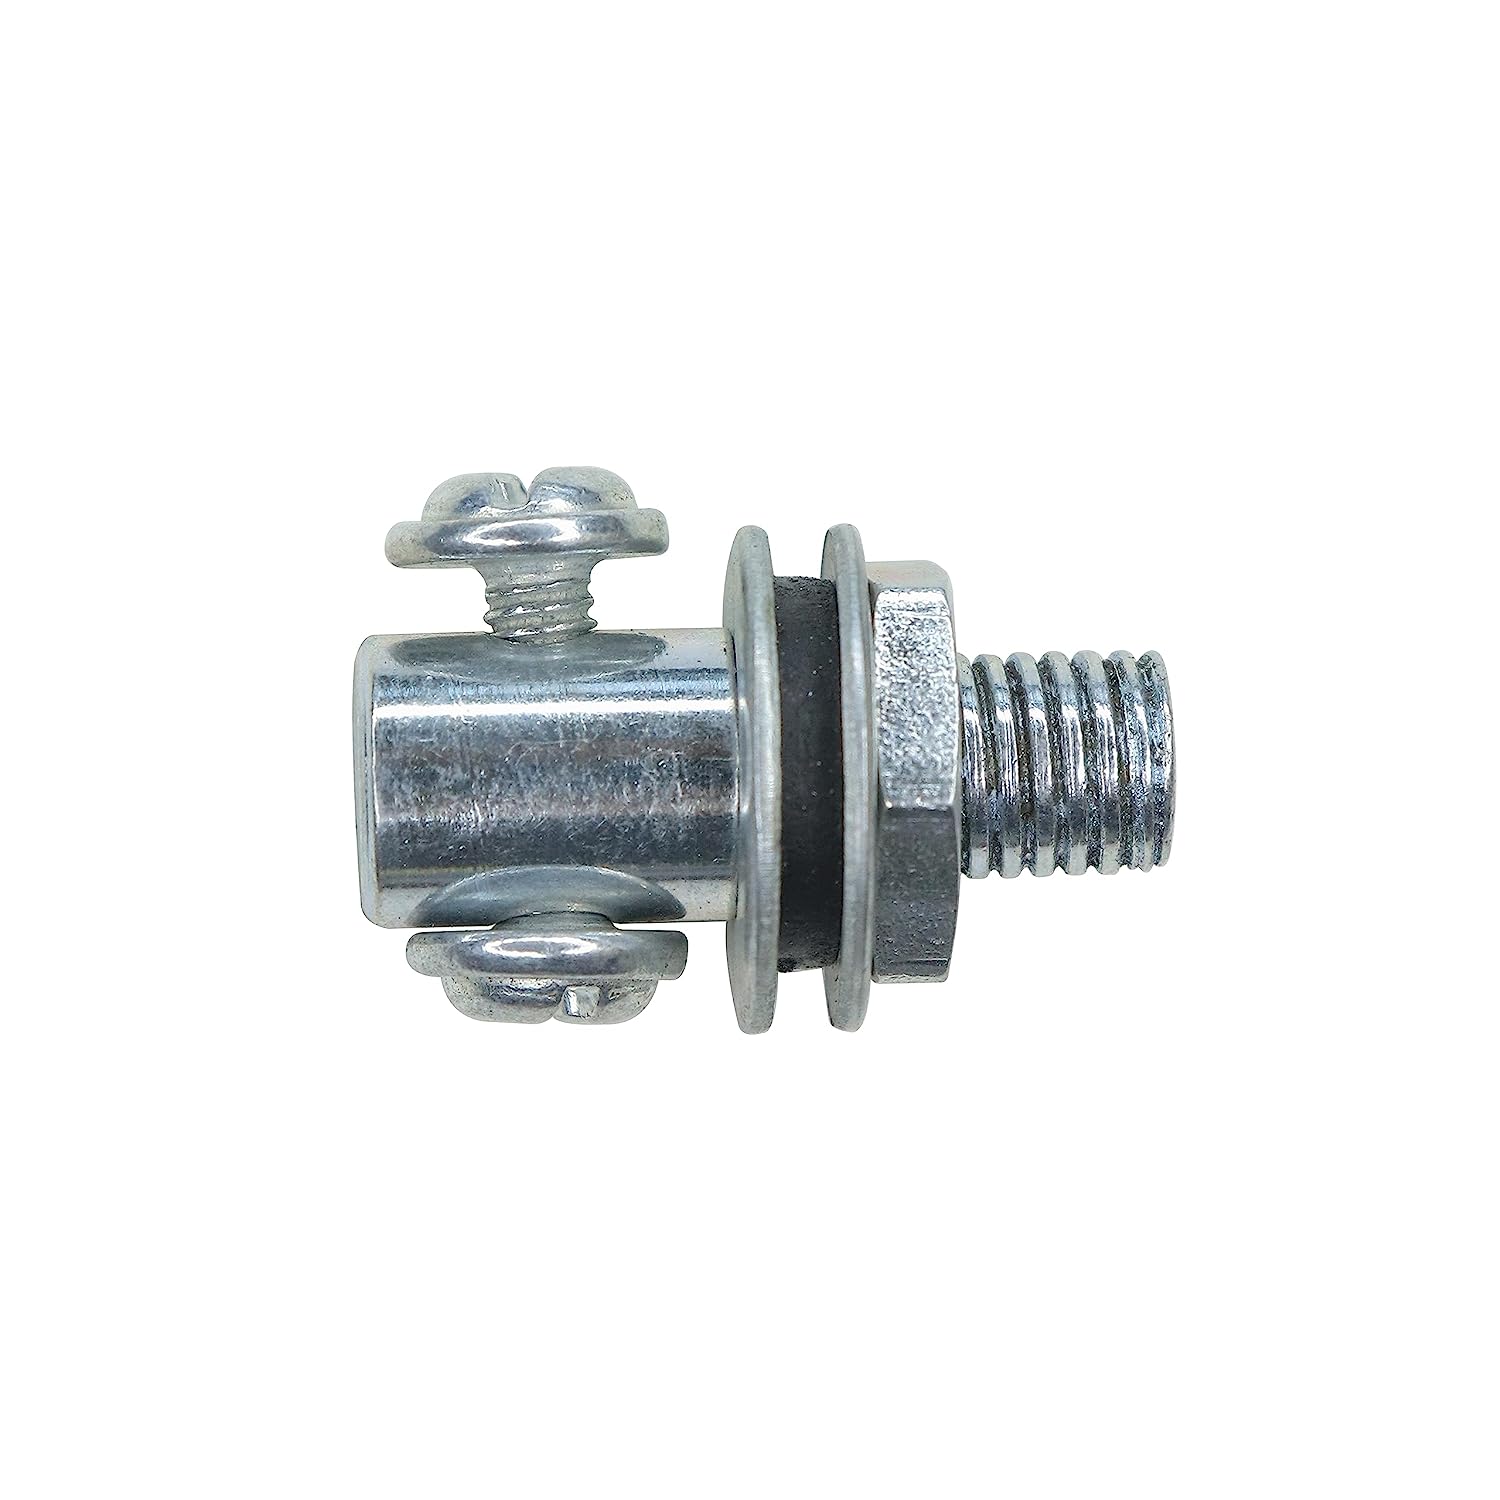 5mm Shaft Adapter, Stud Connector for 775 Motor